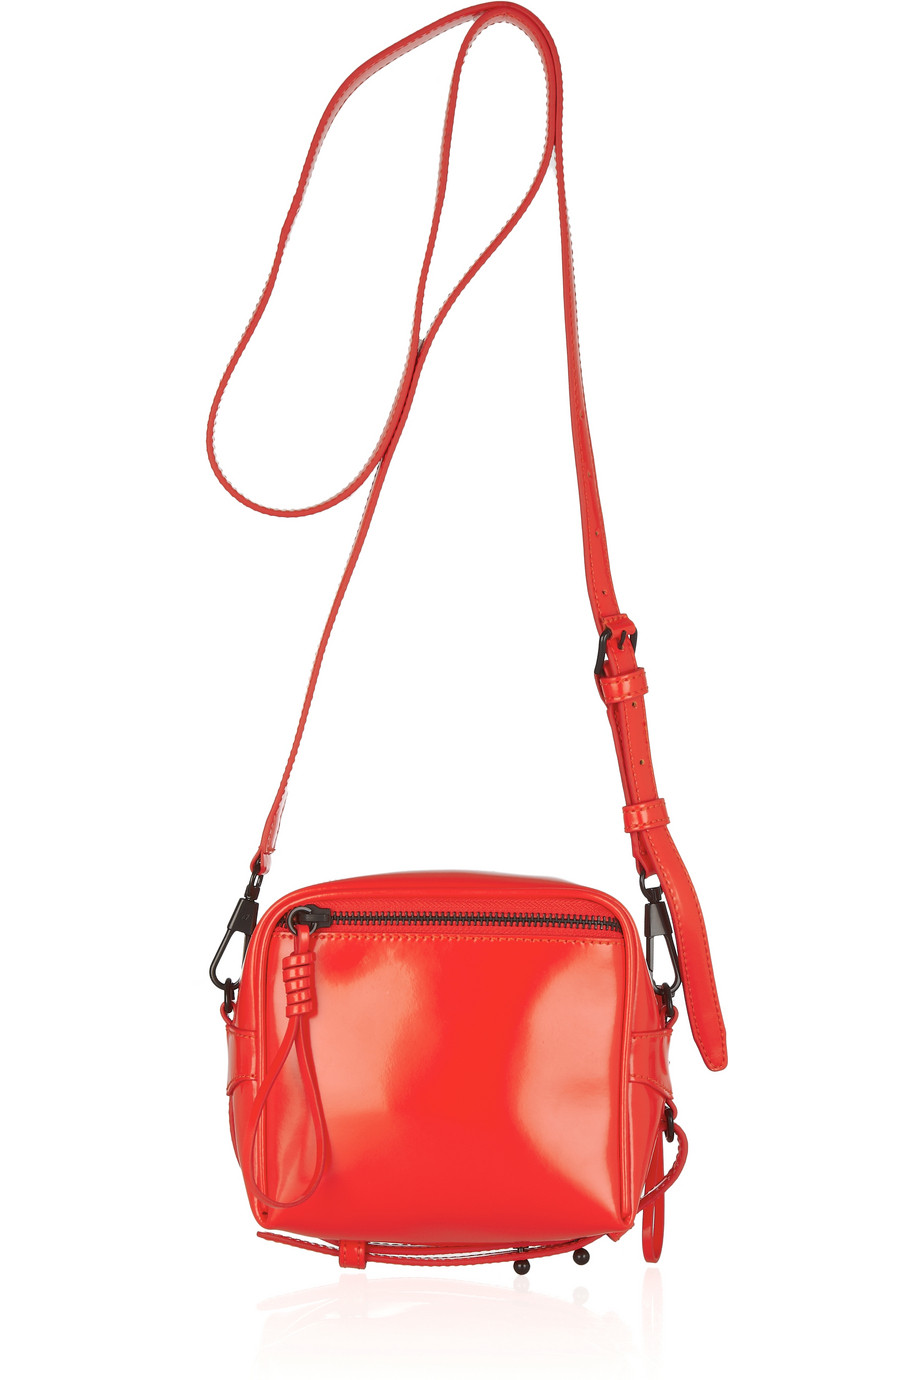 18 of the Best Summer Shoulder Bags - The Front Row View